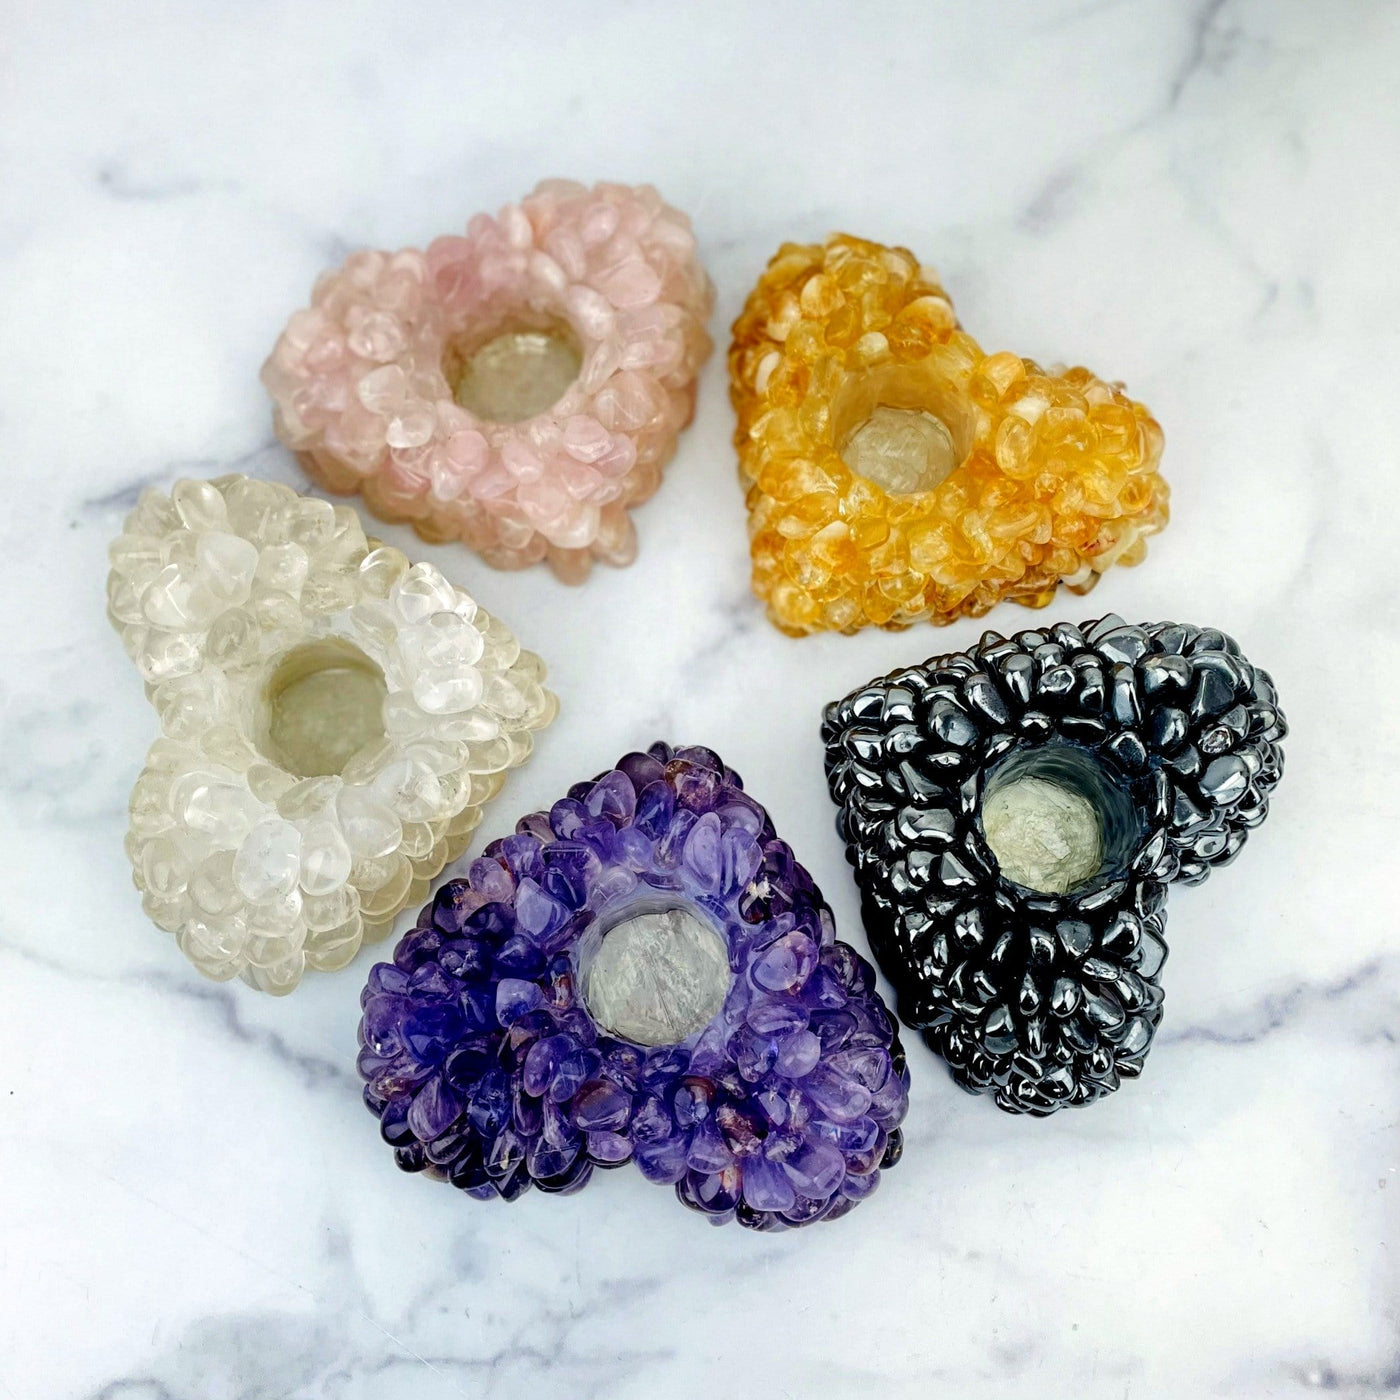 various typed of crystal tumbled stone heart candle holders on marble background